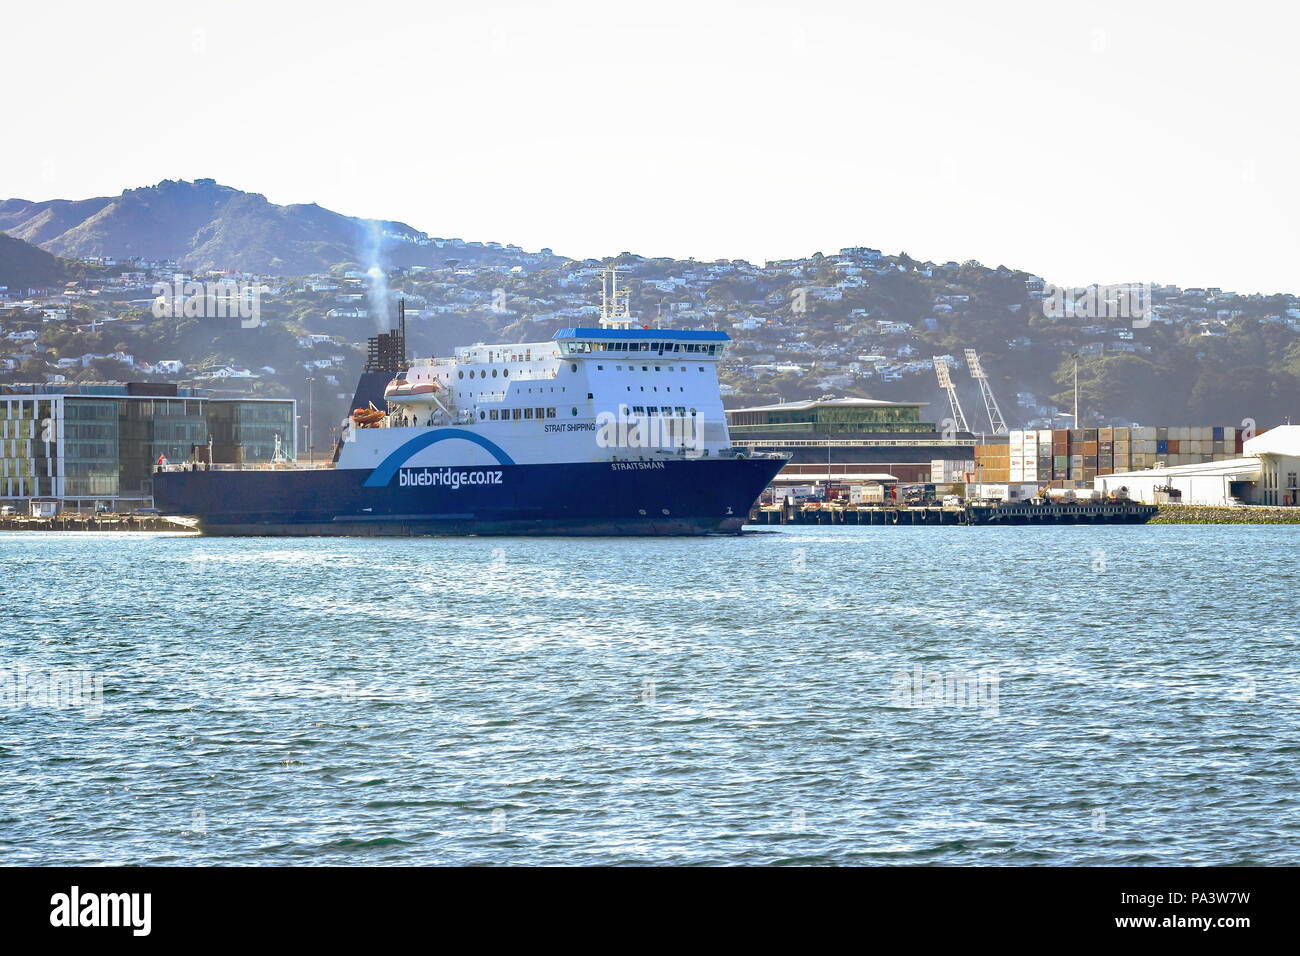 Wellington, New Zealand - June 4, 2016: The Bluebridge Cook Strait Ferry carries passengers, vehicles and freight between Wellington and Picton daily. Stock Photo